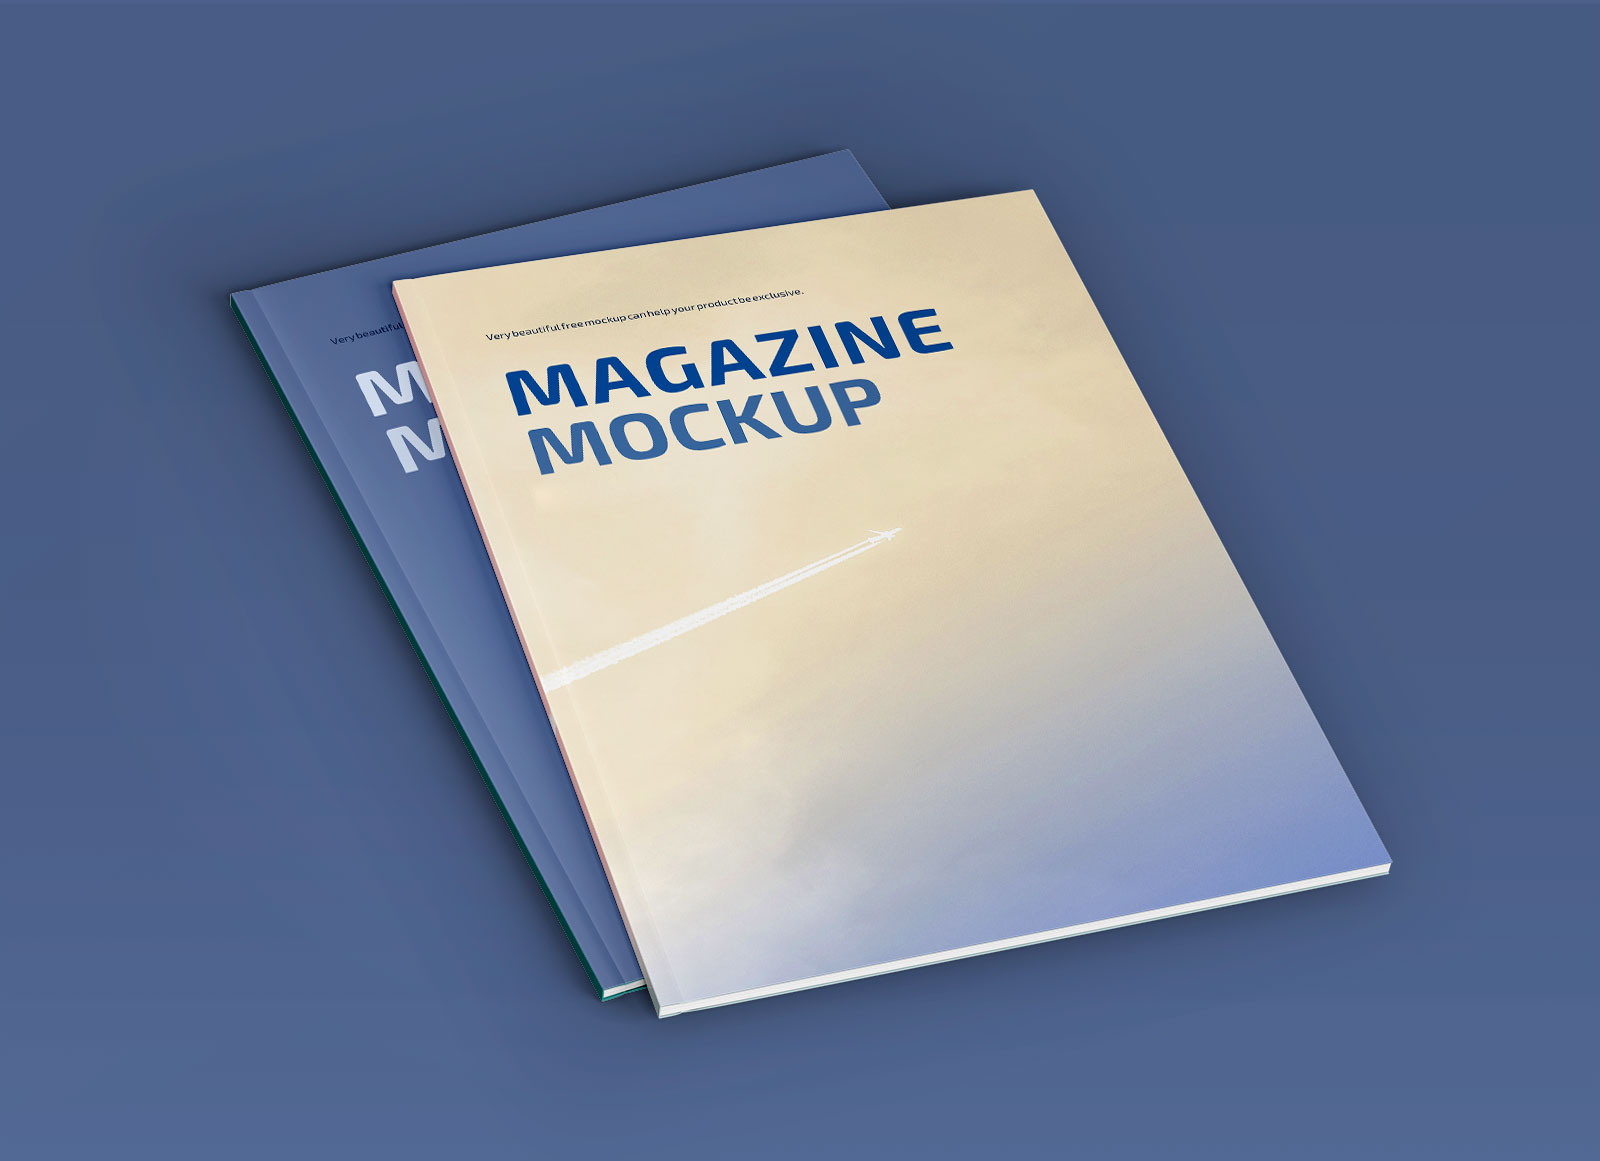 Free-Title-&-Inner-pages-Magazine-Mockup-PSD-Set